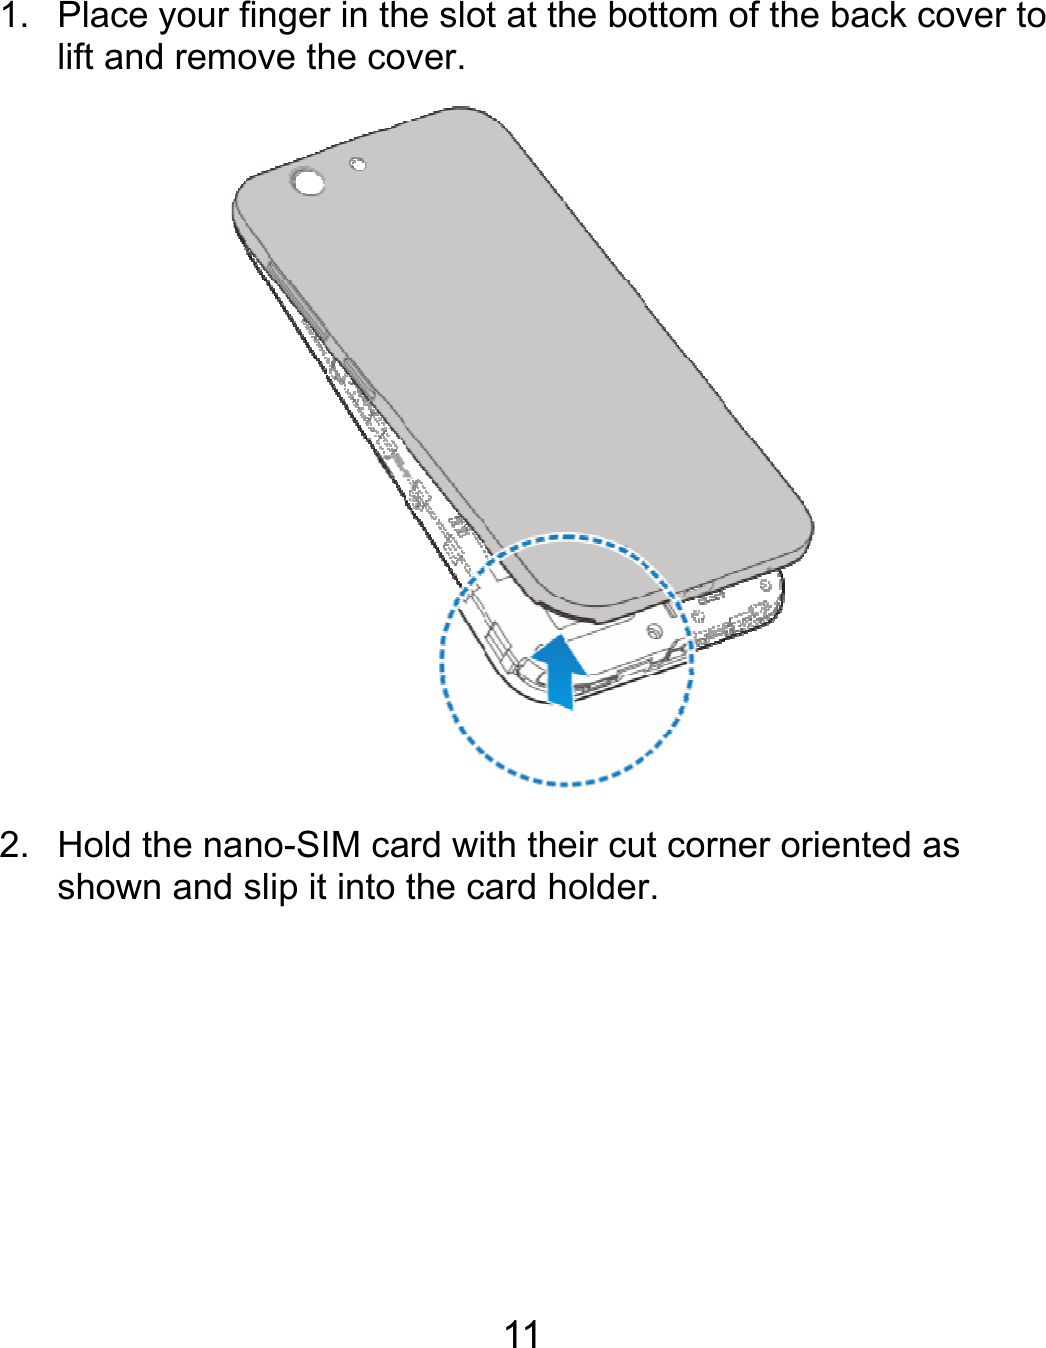  1. Place lift and2. Hold tshownyour finger in thed remove the covthe nano-SIM can and slip it into t11 e slot at the bottover. rd with their cut cthe card holder.om of the back c corner oriented acover to as 